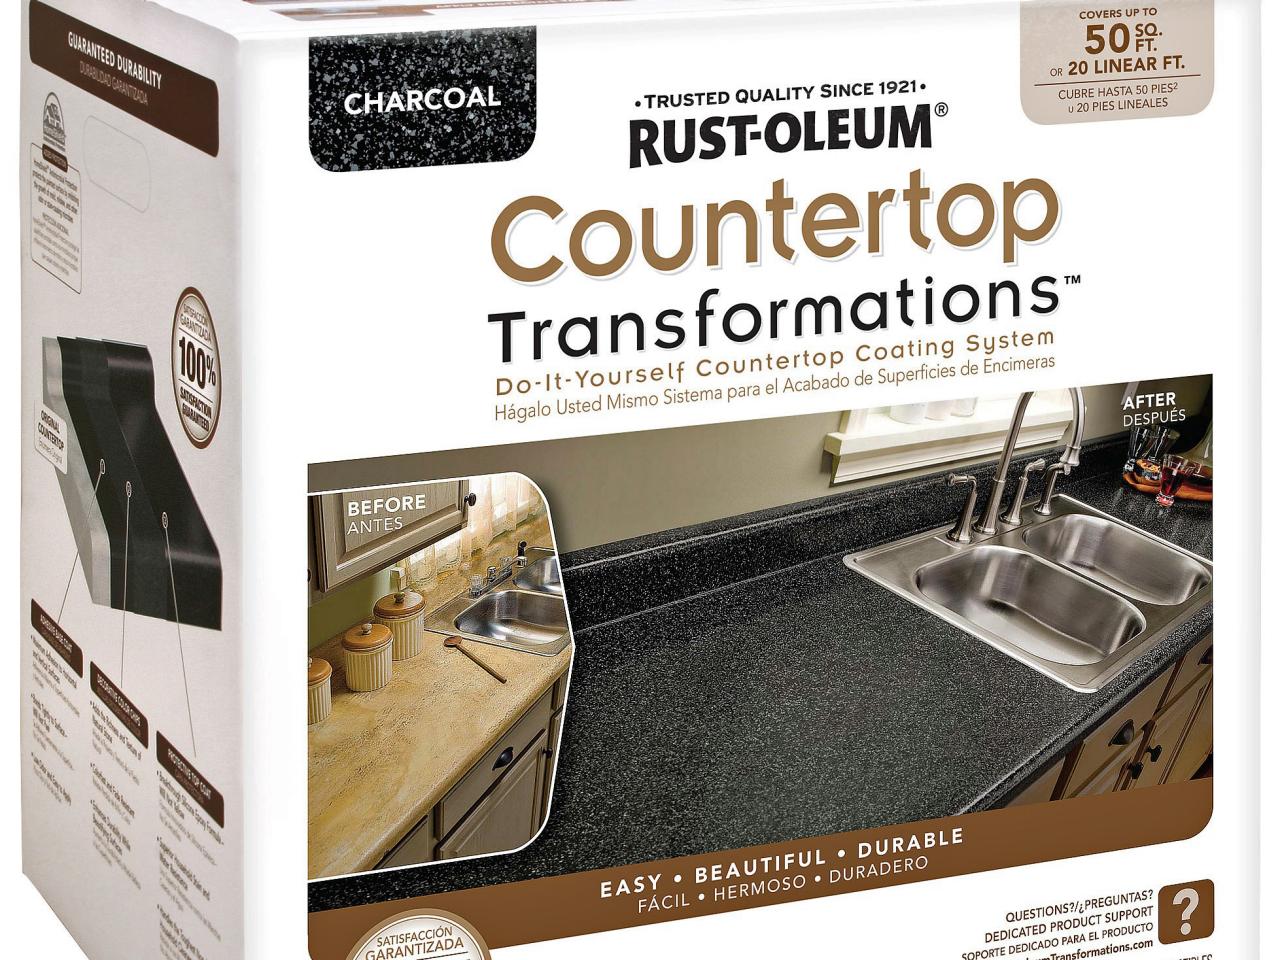 How To Paint Laminate Kitchen Countertops Diy,Puppy Vomiting Roundworms